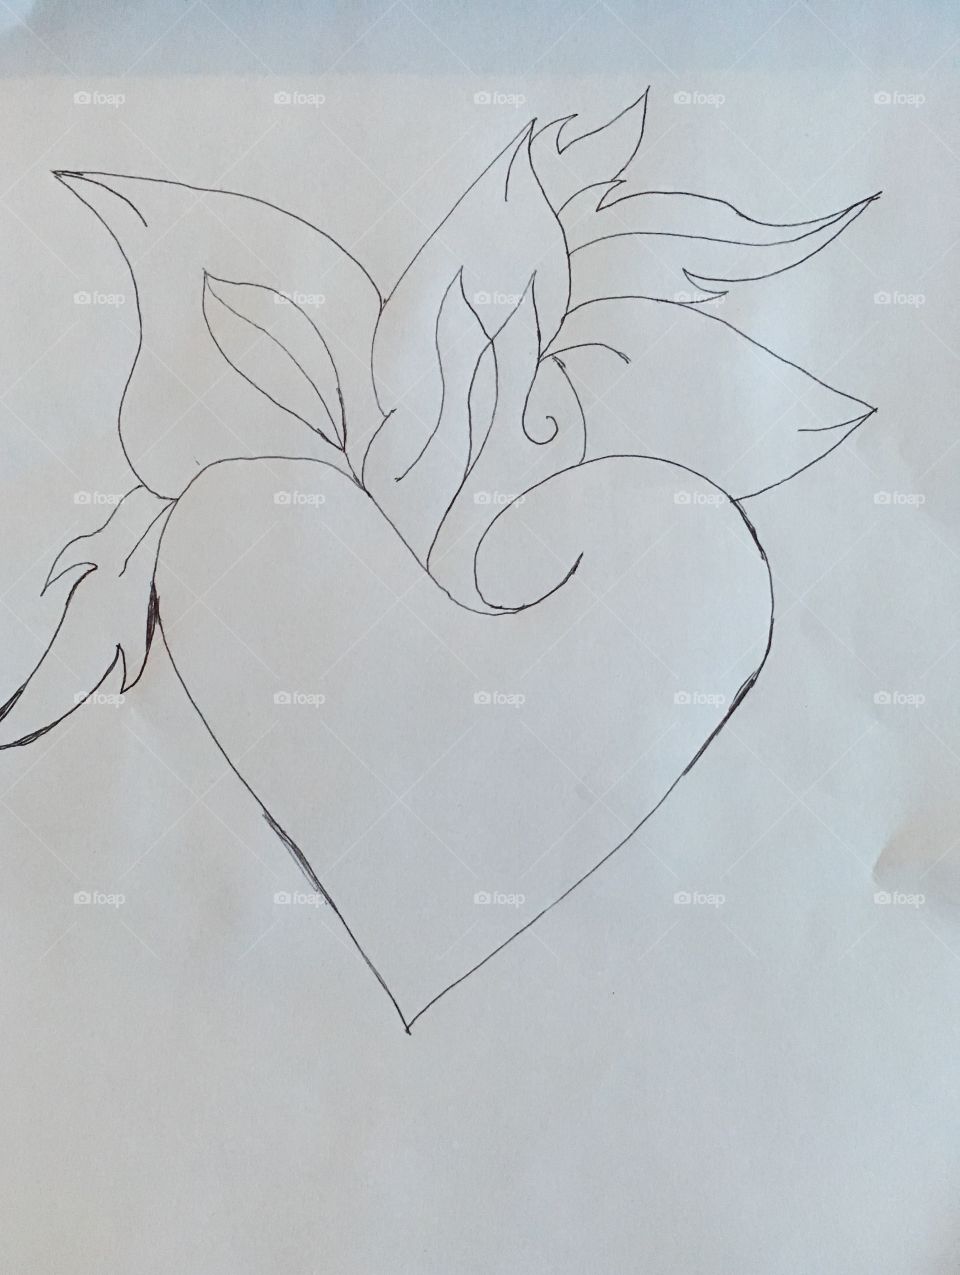 This is a drawing of a cute heart with flowers